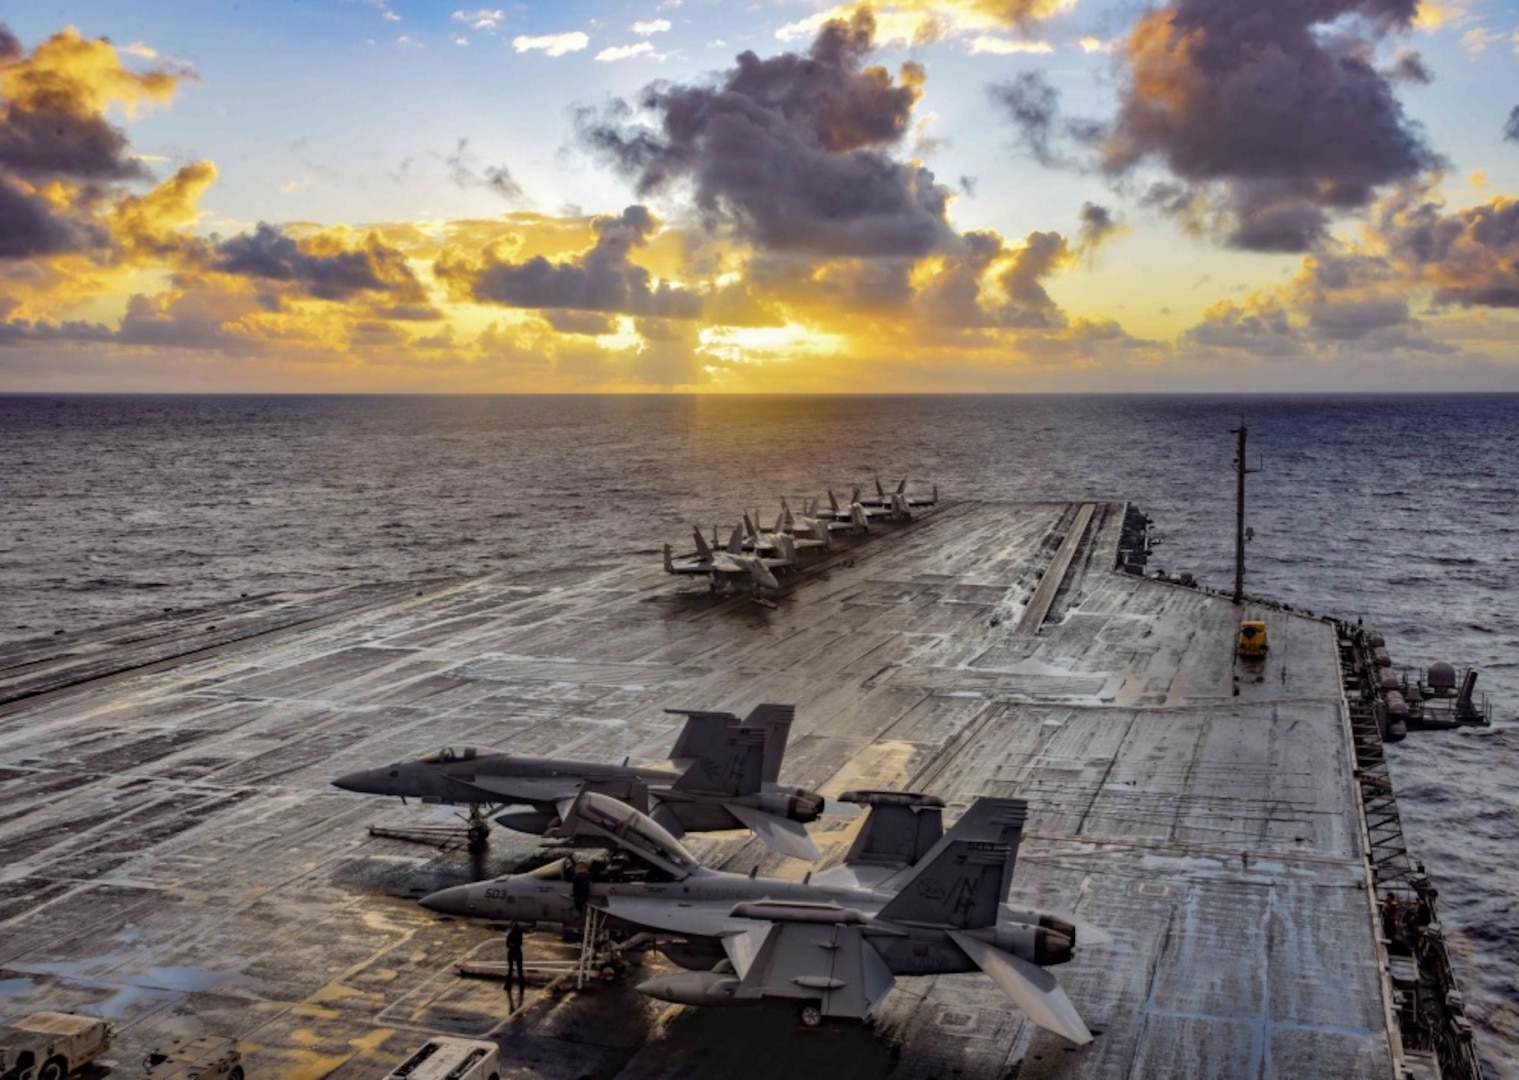 USS Theodore Roosevelt Completes Carrier Qualifications